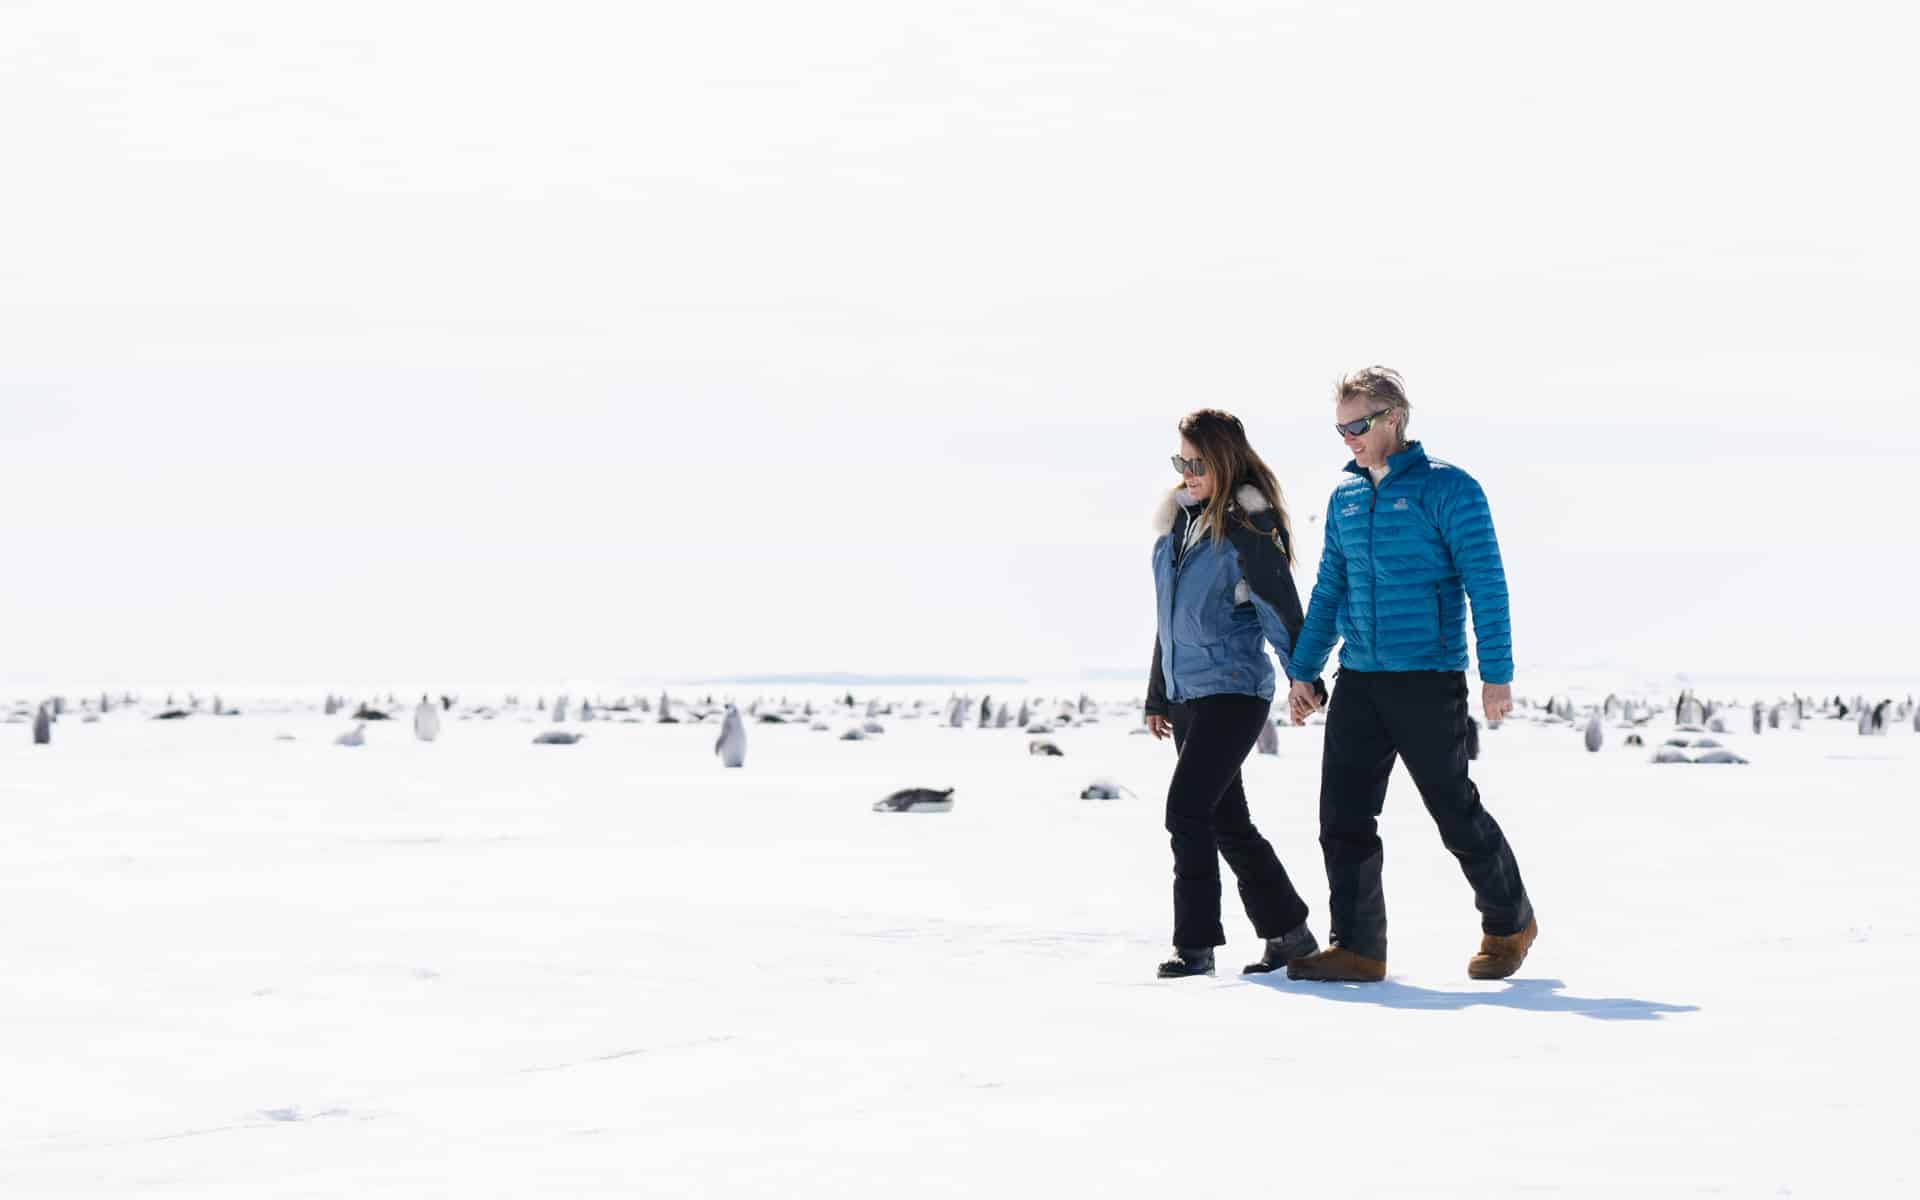 Patrick Woodhead in Antarctica walking holding his wife Robyn’s hand.